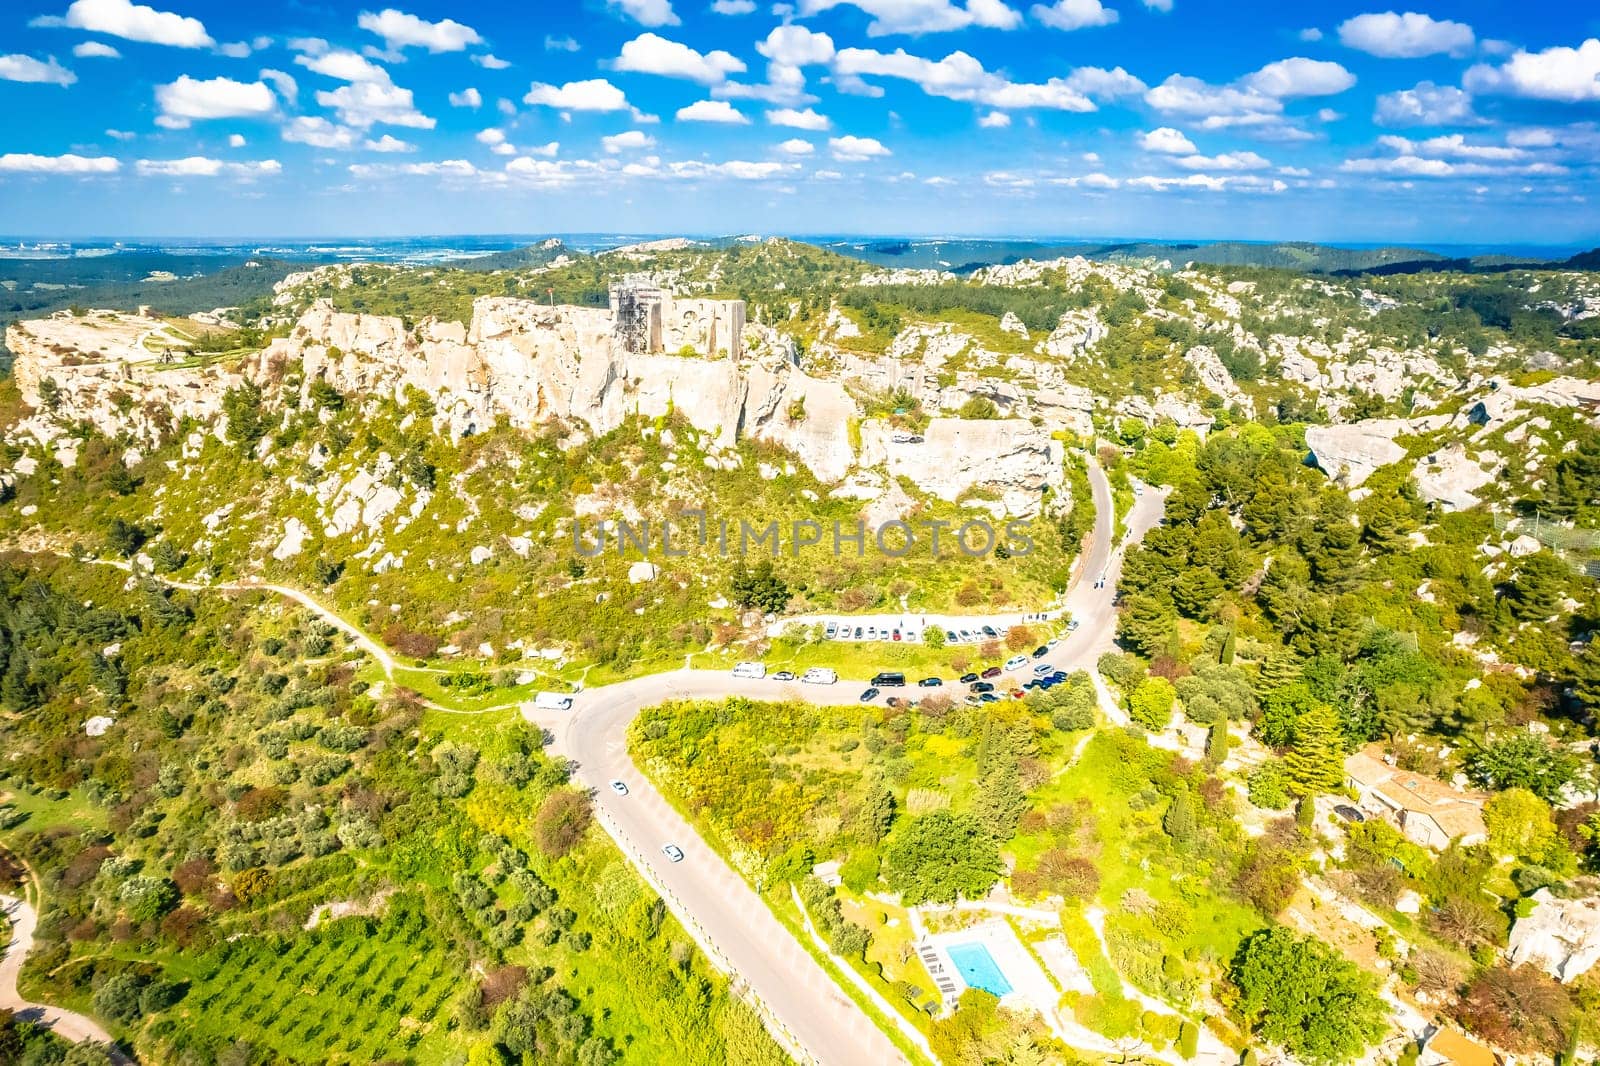 Les Baux de Provence scenic town on the rock aerial view, southern France